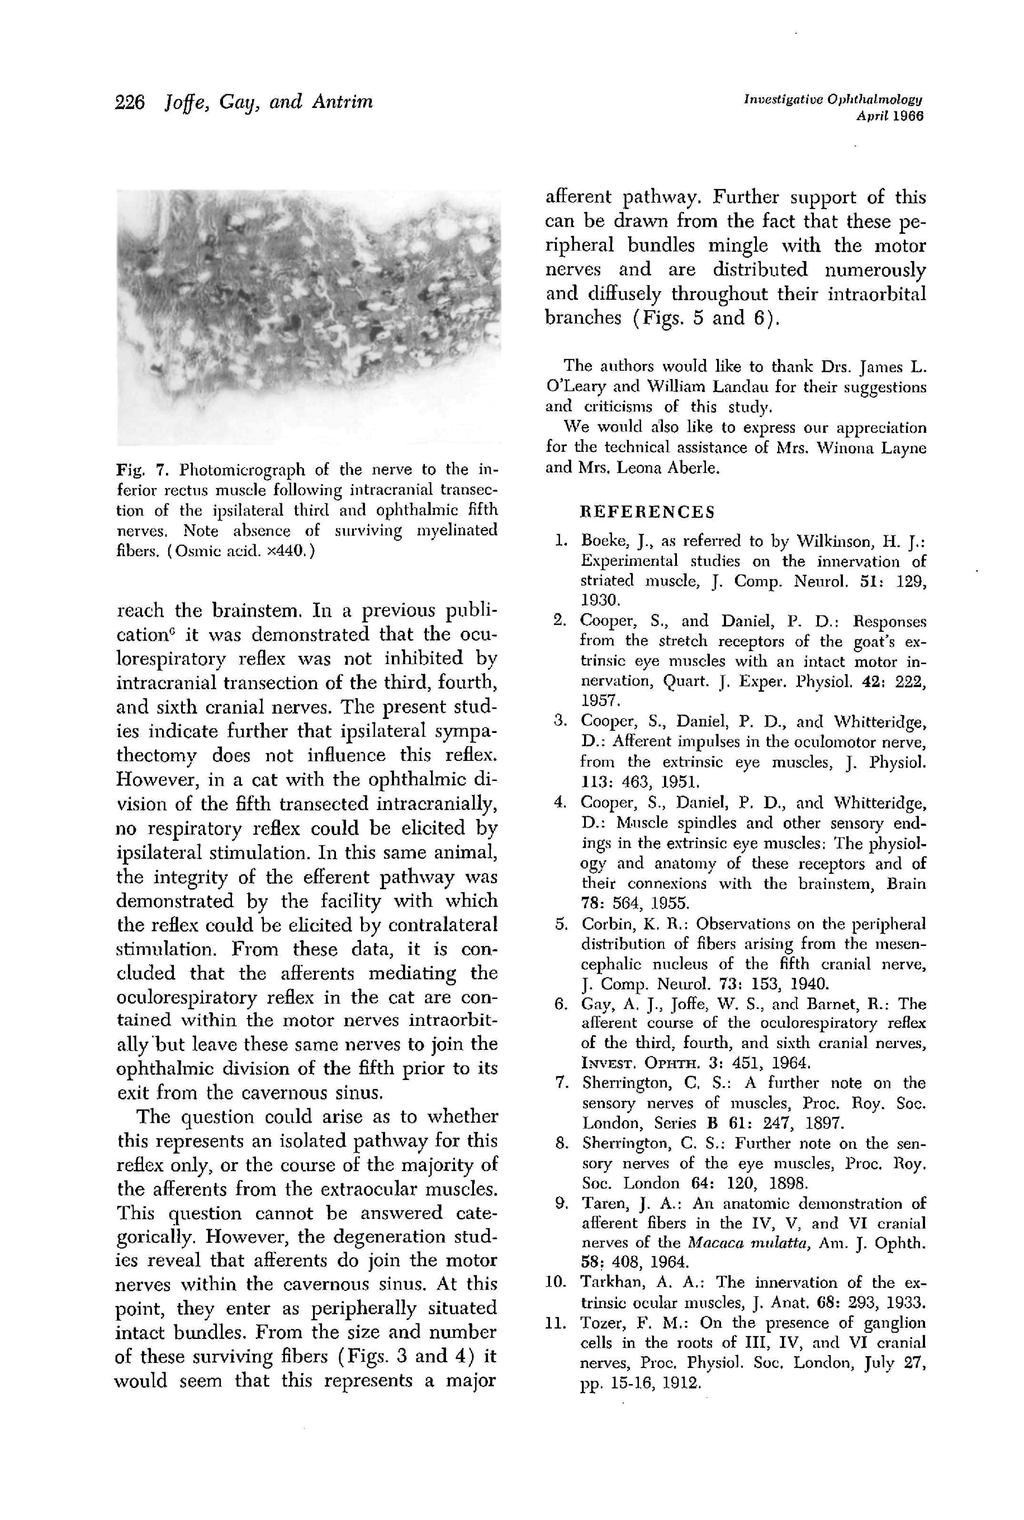 Investigative Ophtlialmology April 1966 226 Joffe, Gay, and Antrim afferent pathway.